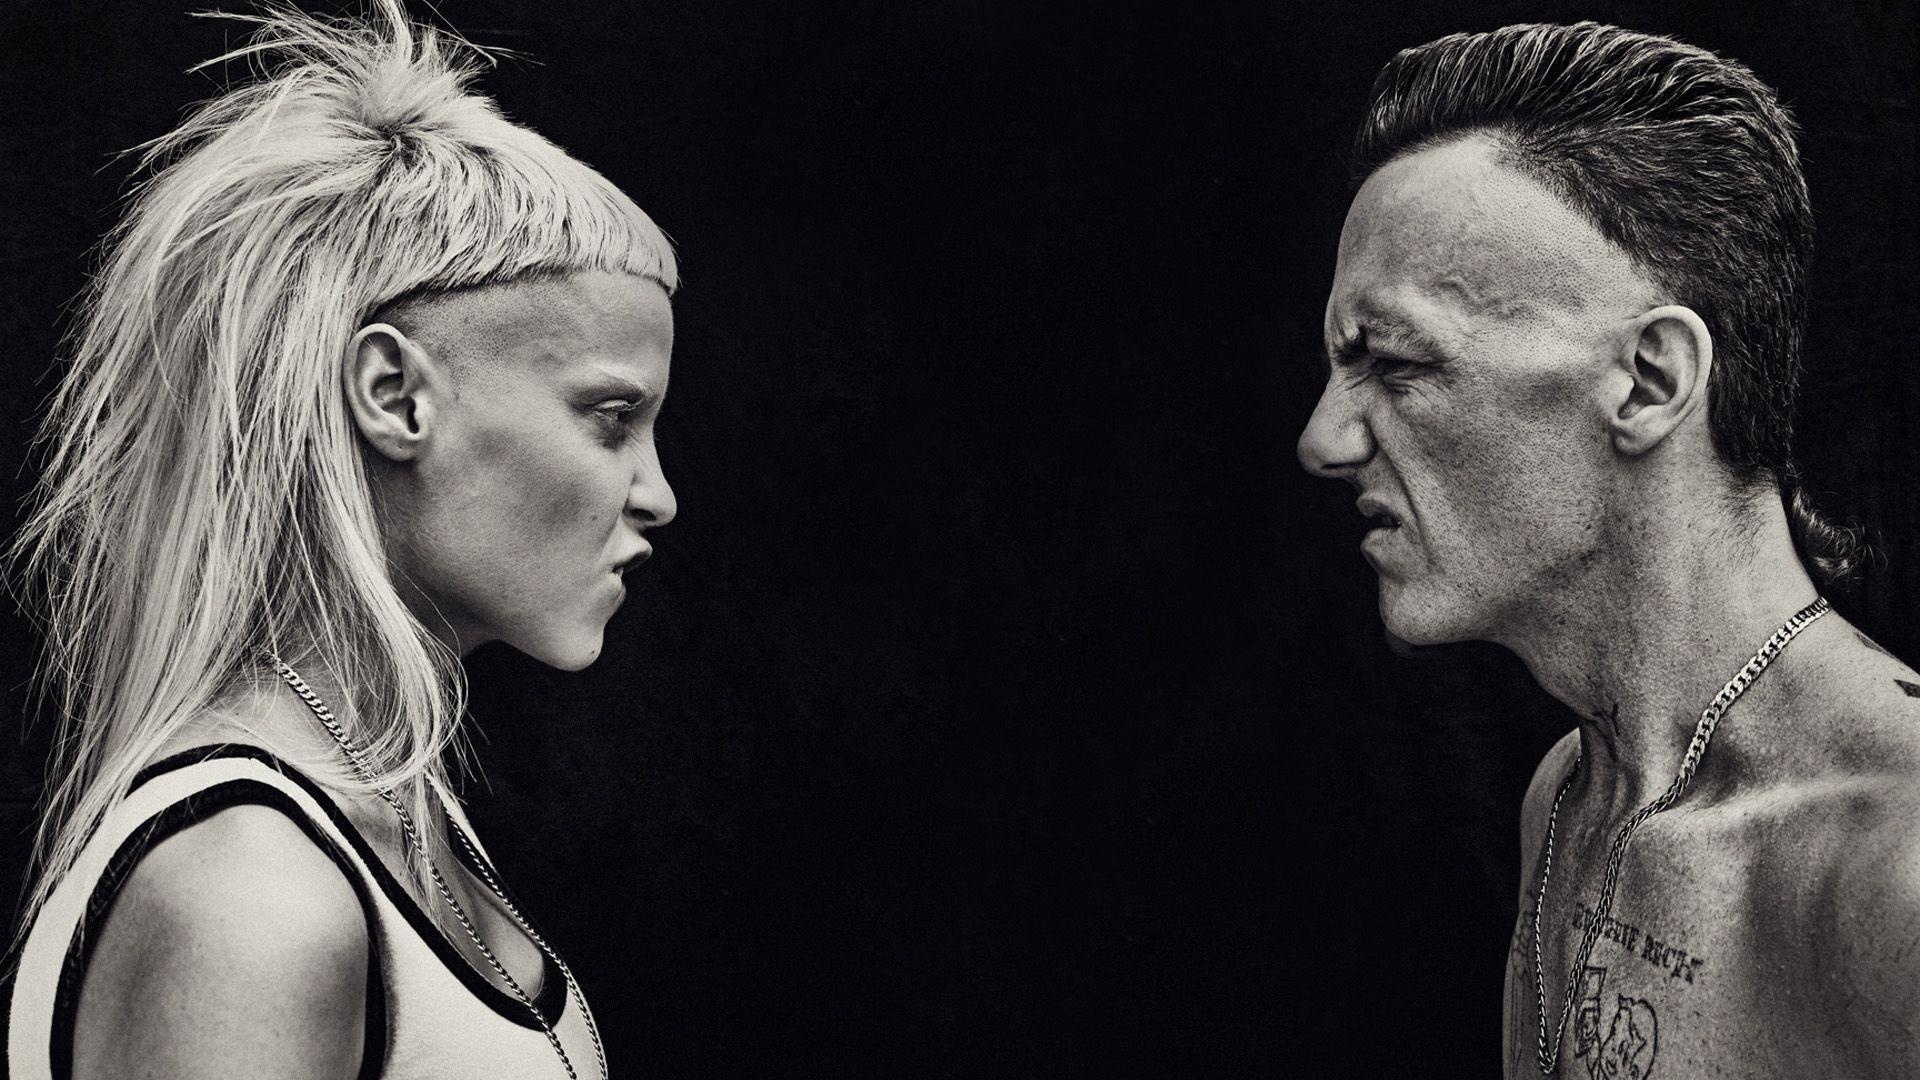 Die Antwoord: Formed their own independent label, Zef Recordz, and released their second album Tension through it. 1920x1080 Full HD Background.